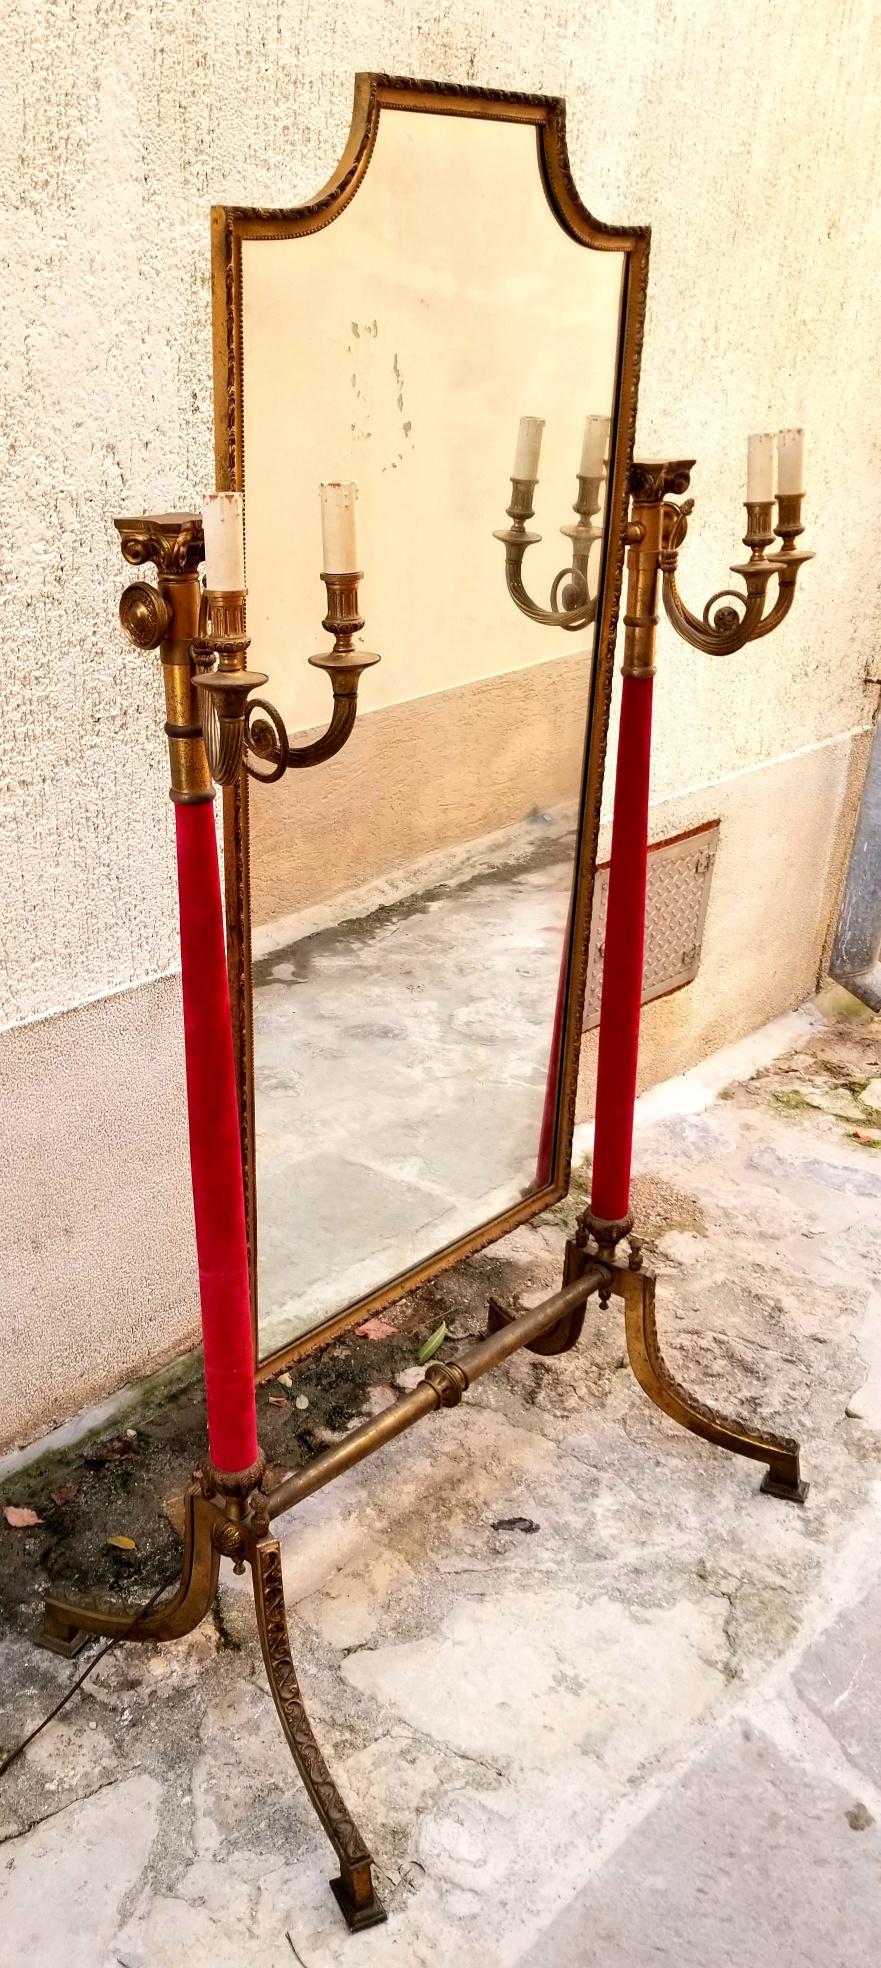 Italian brass mirror from Venice boutique at San Marco square. Mirror is a full size length and adjustable like a chevalier mirror. The mirror itself is 53 height and 25 width. The candle cover is hand carved wood and the rest is brass. The red